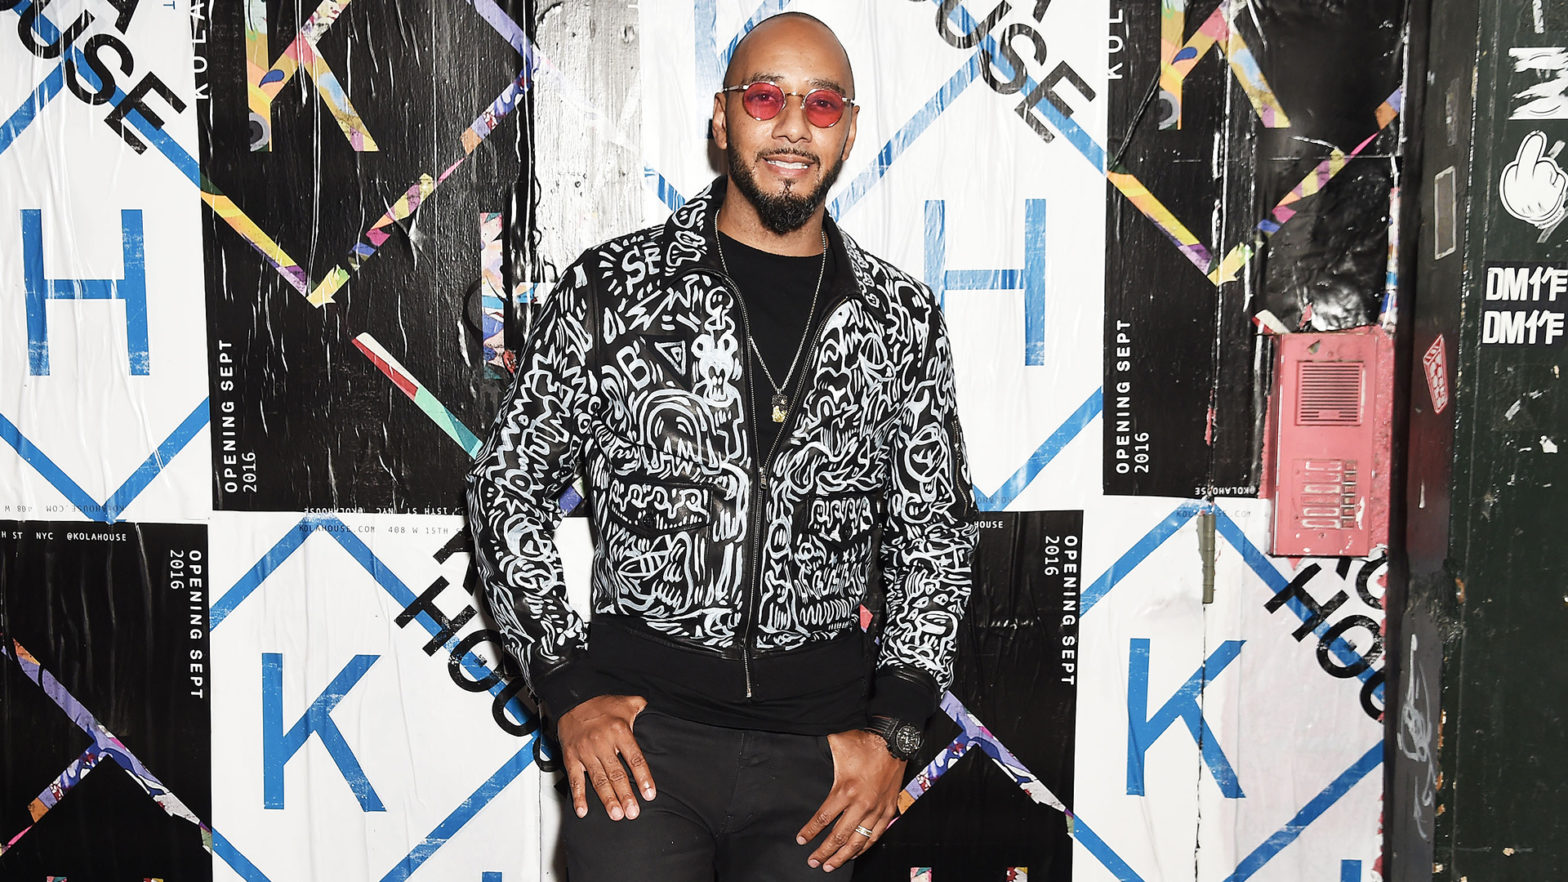 Swizz Beatz Made History As The First African American To Own A Camel-Racing Team Based In The Middle East